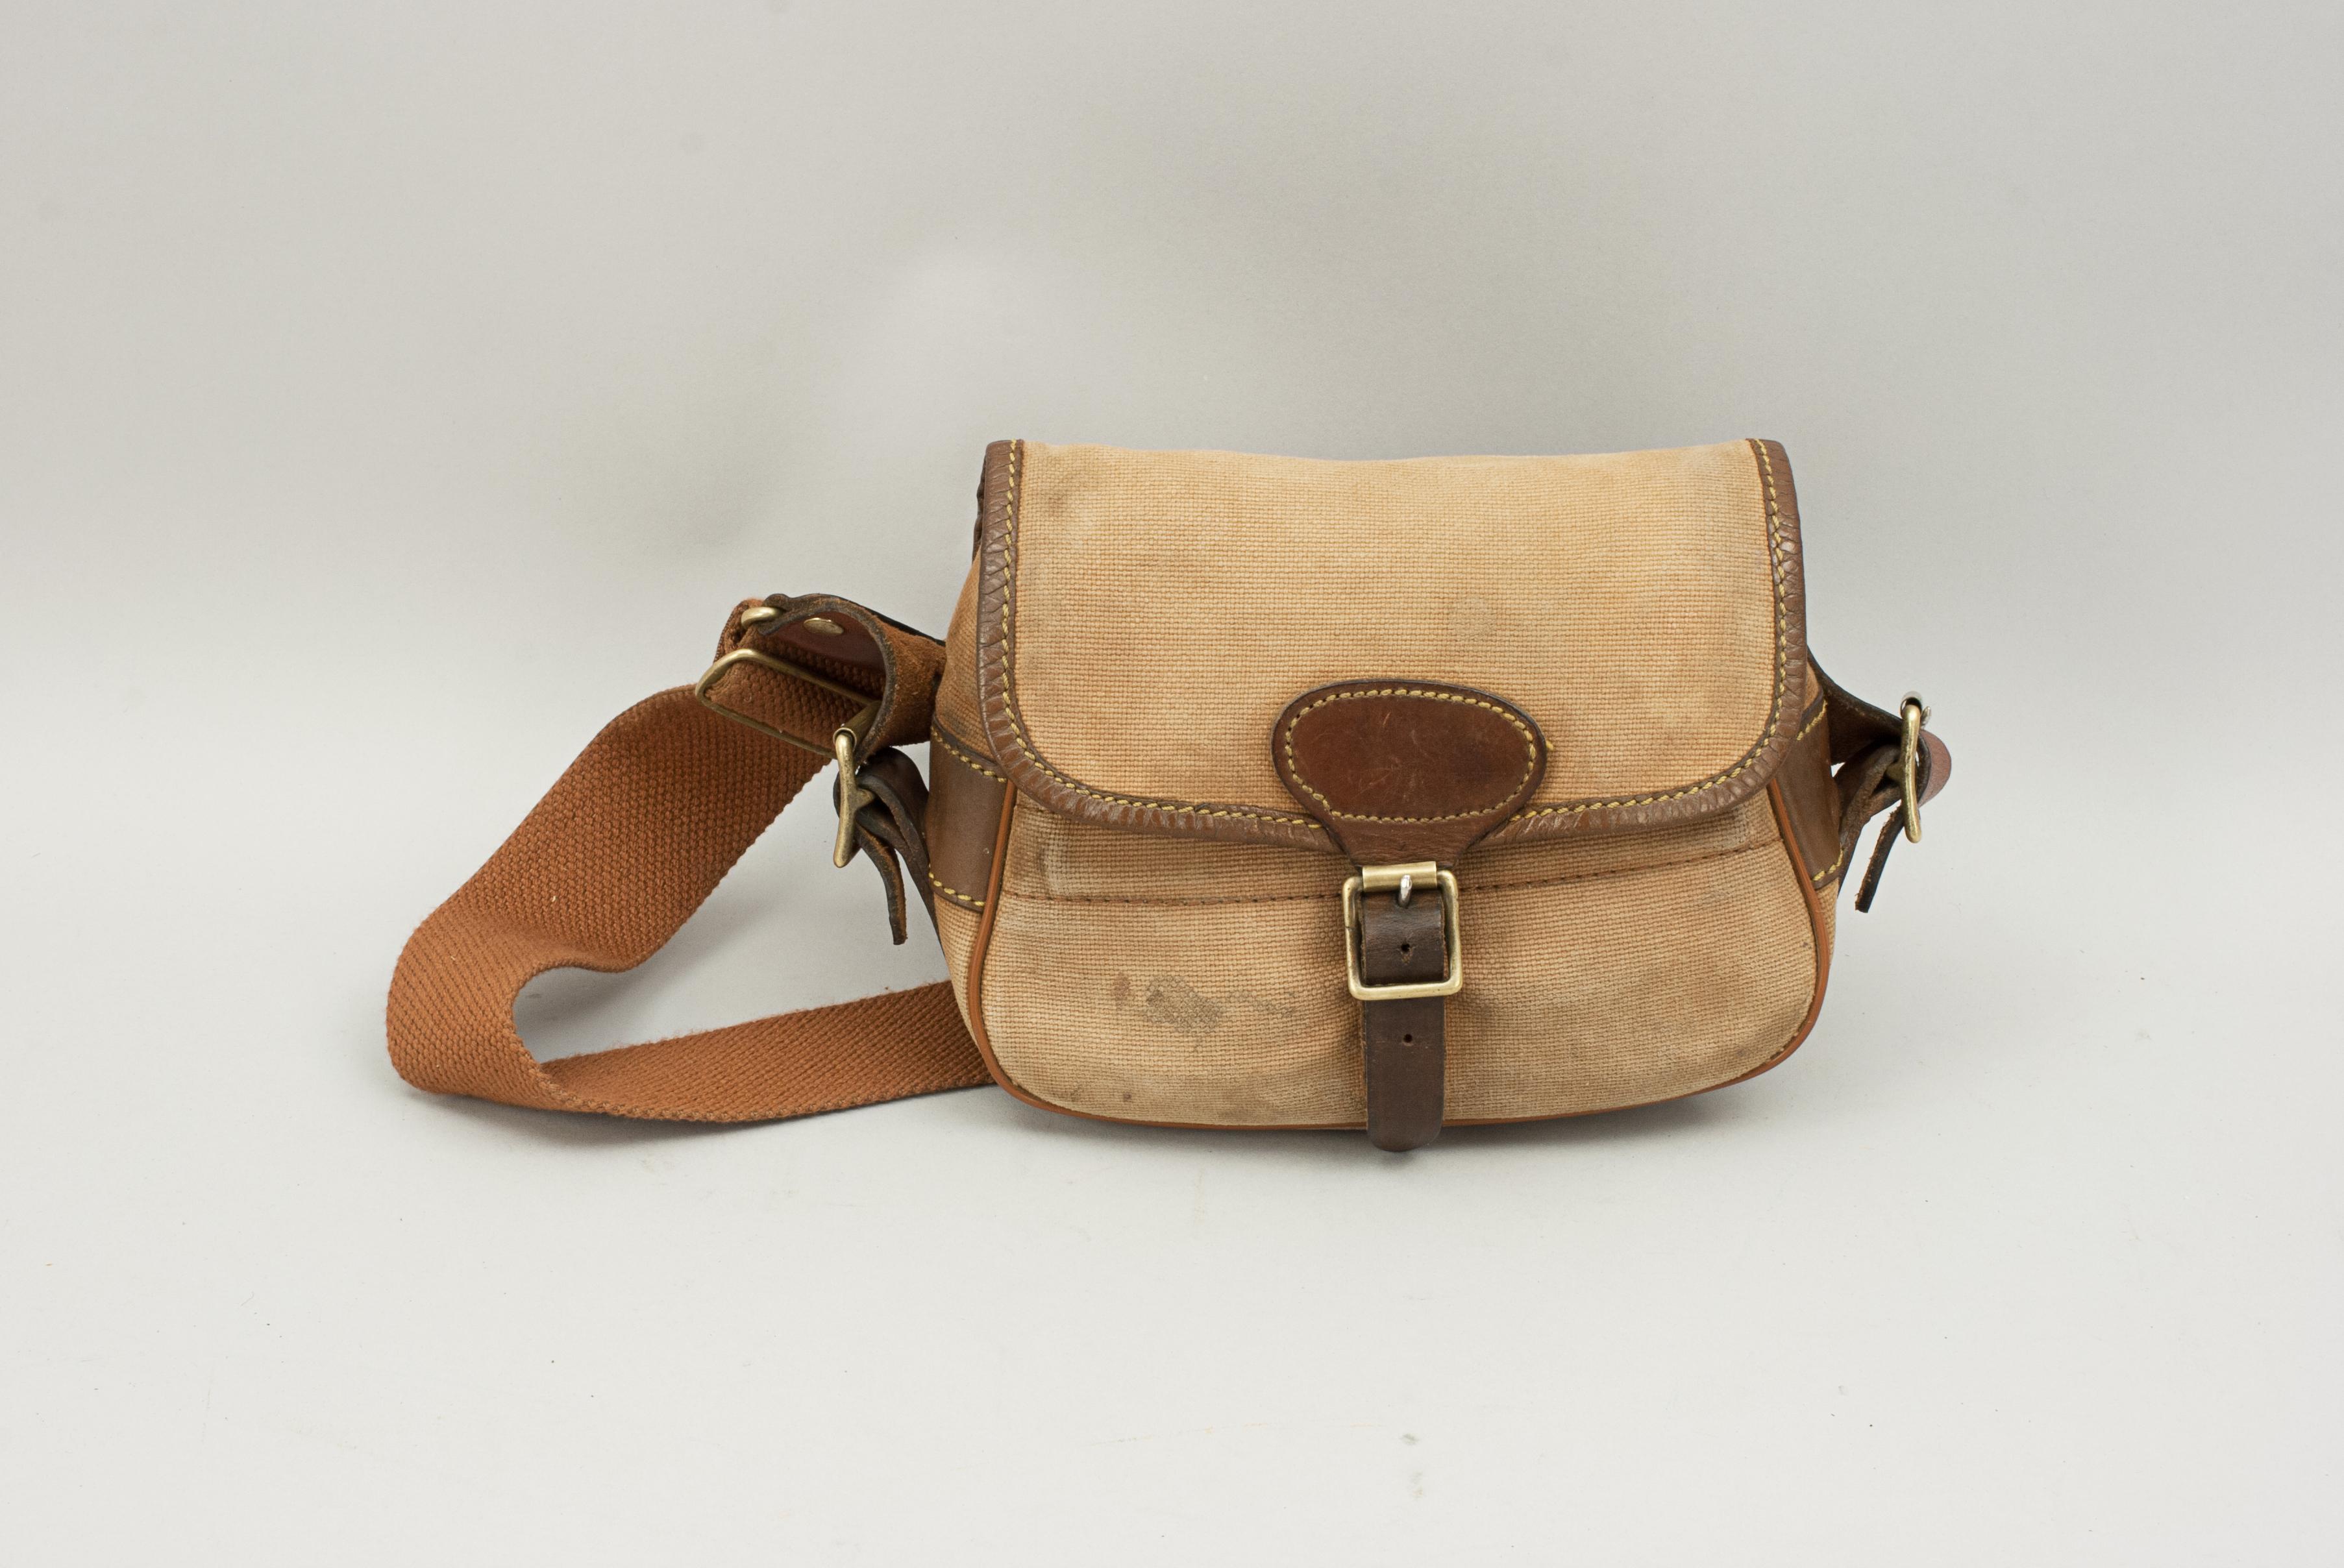 Vintage Canvas Cartridge Bag.
A good quality small canvas cartridge bag. The bag is in good usable condition with brass fittings, leather trim and a replaced cotton web adjustable shoulder strap. The case holds about 50 cartridges. A nice cartridge